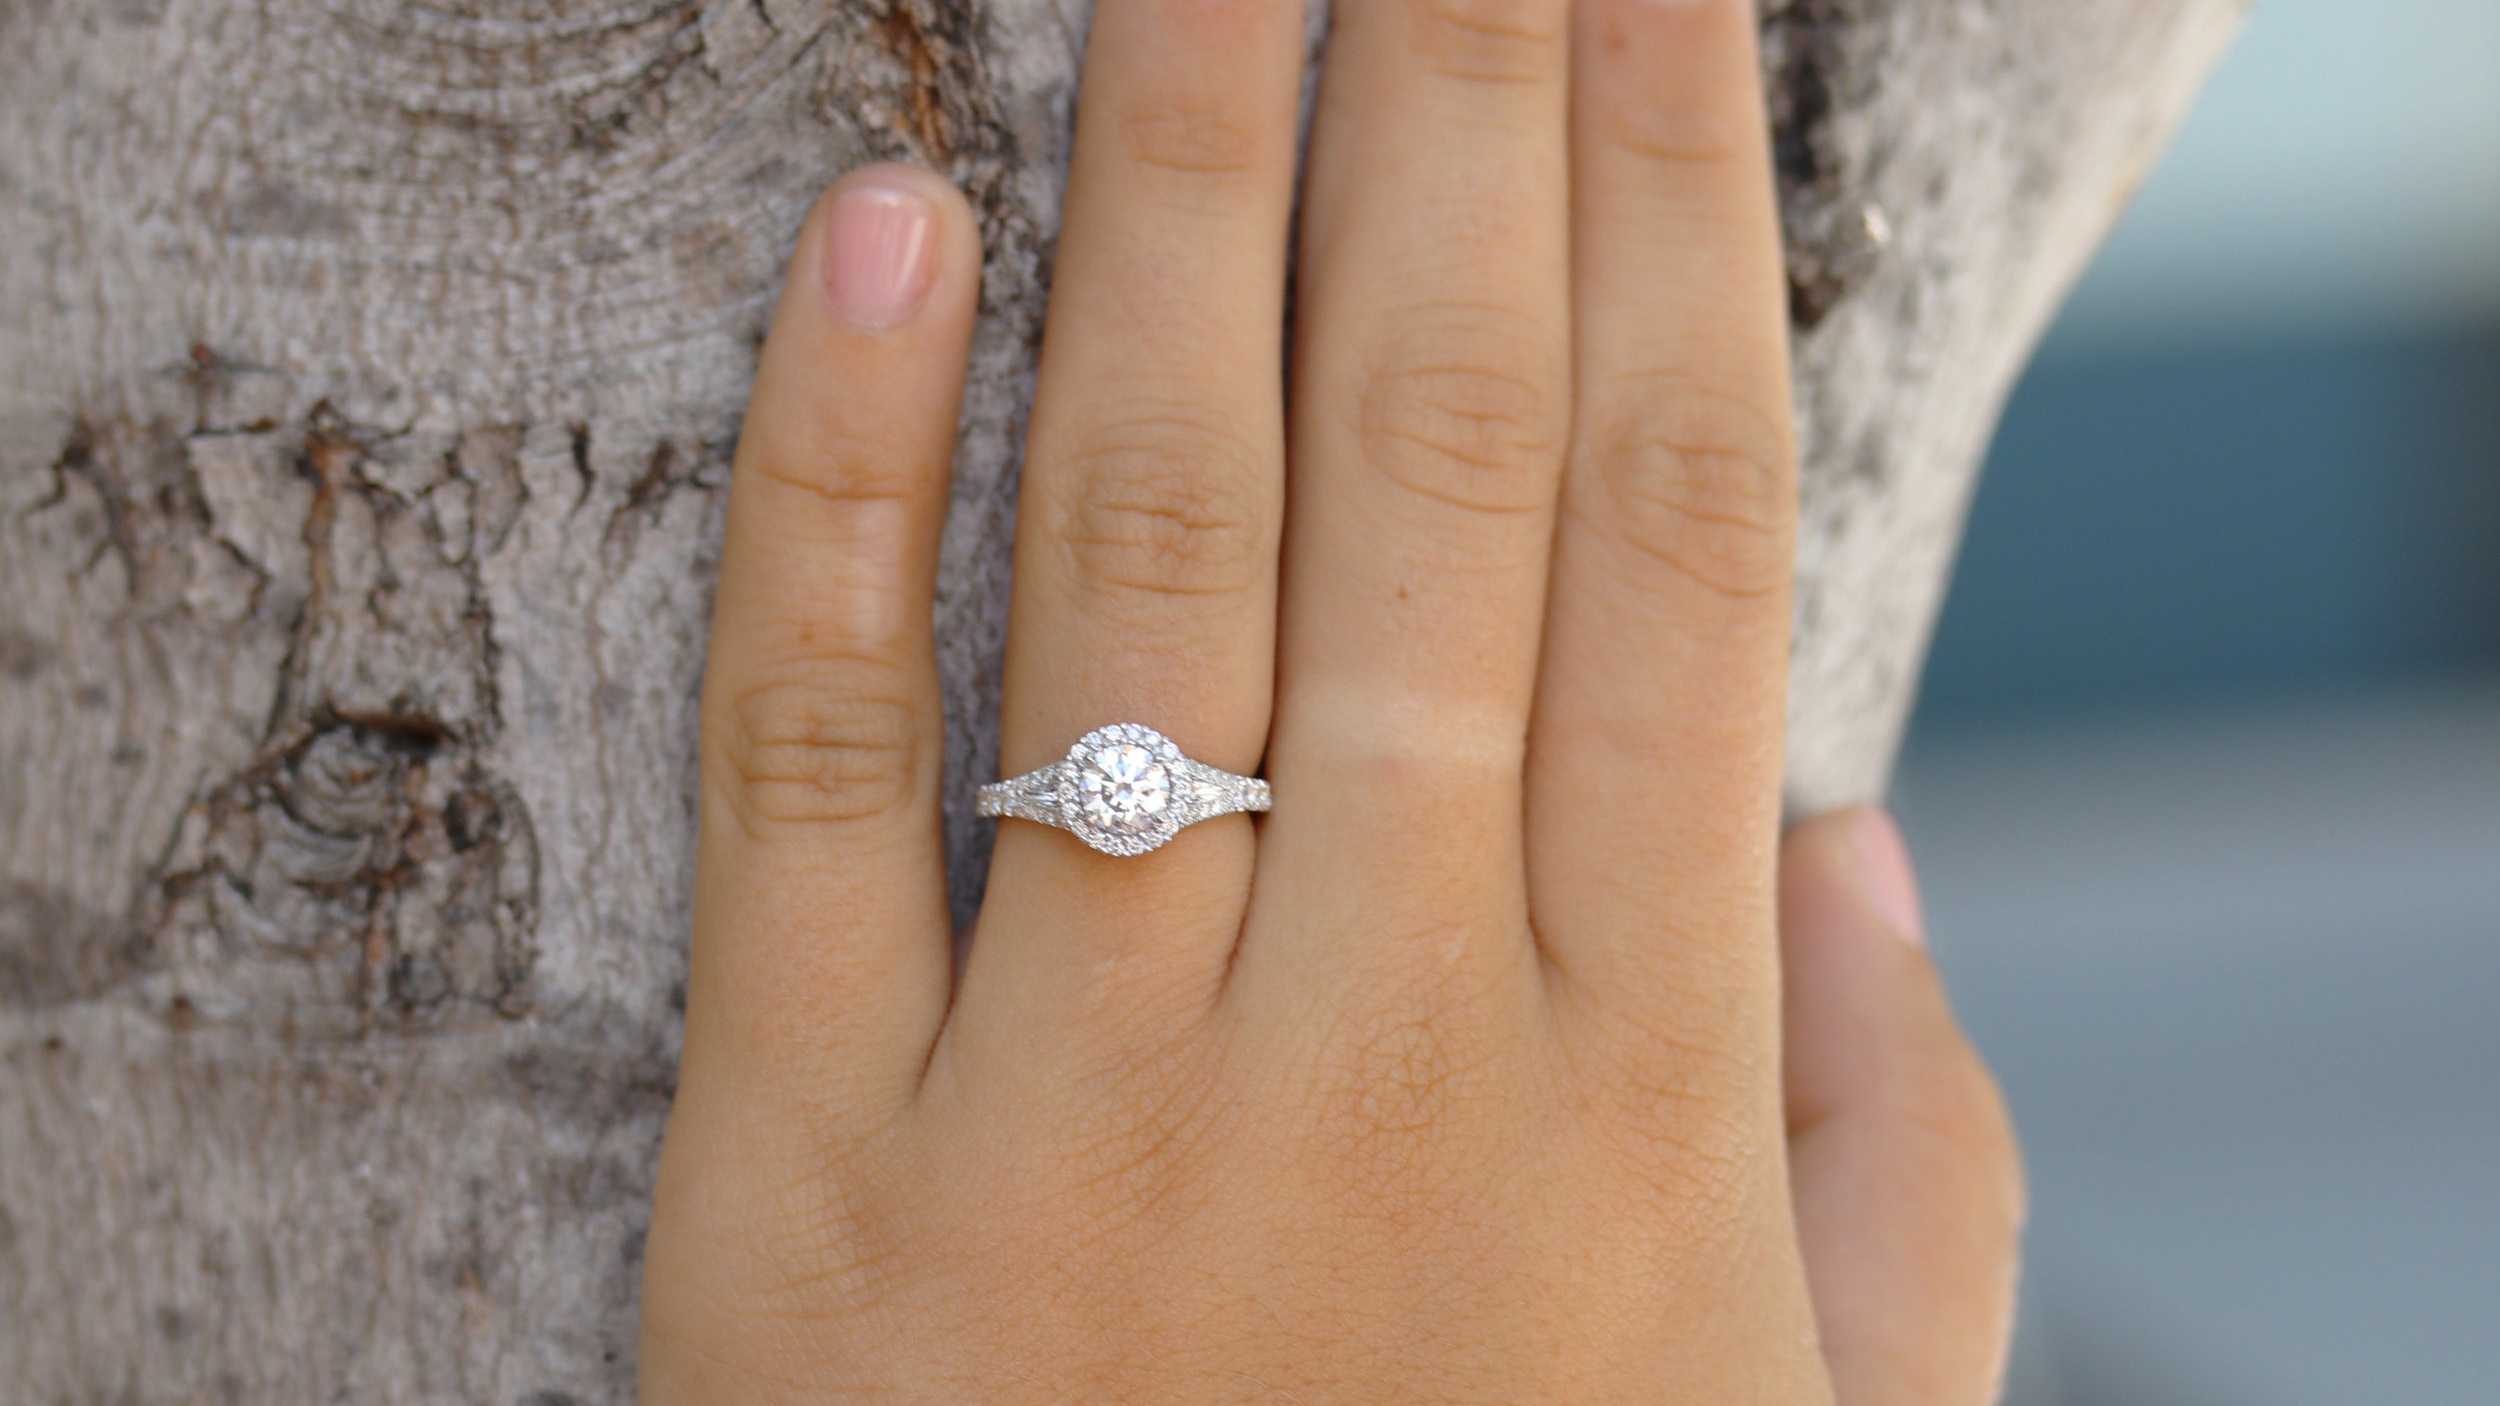 Most Impractical Engagement Ring Trends, According to Private Jeweler